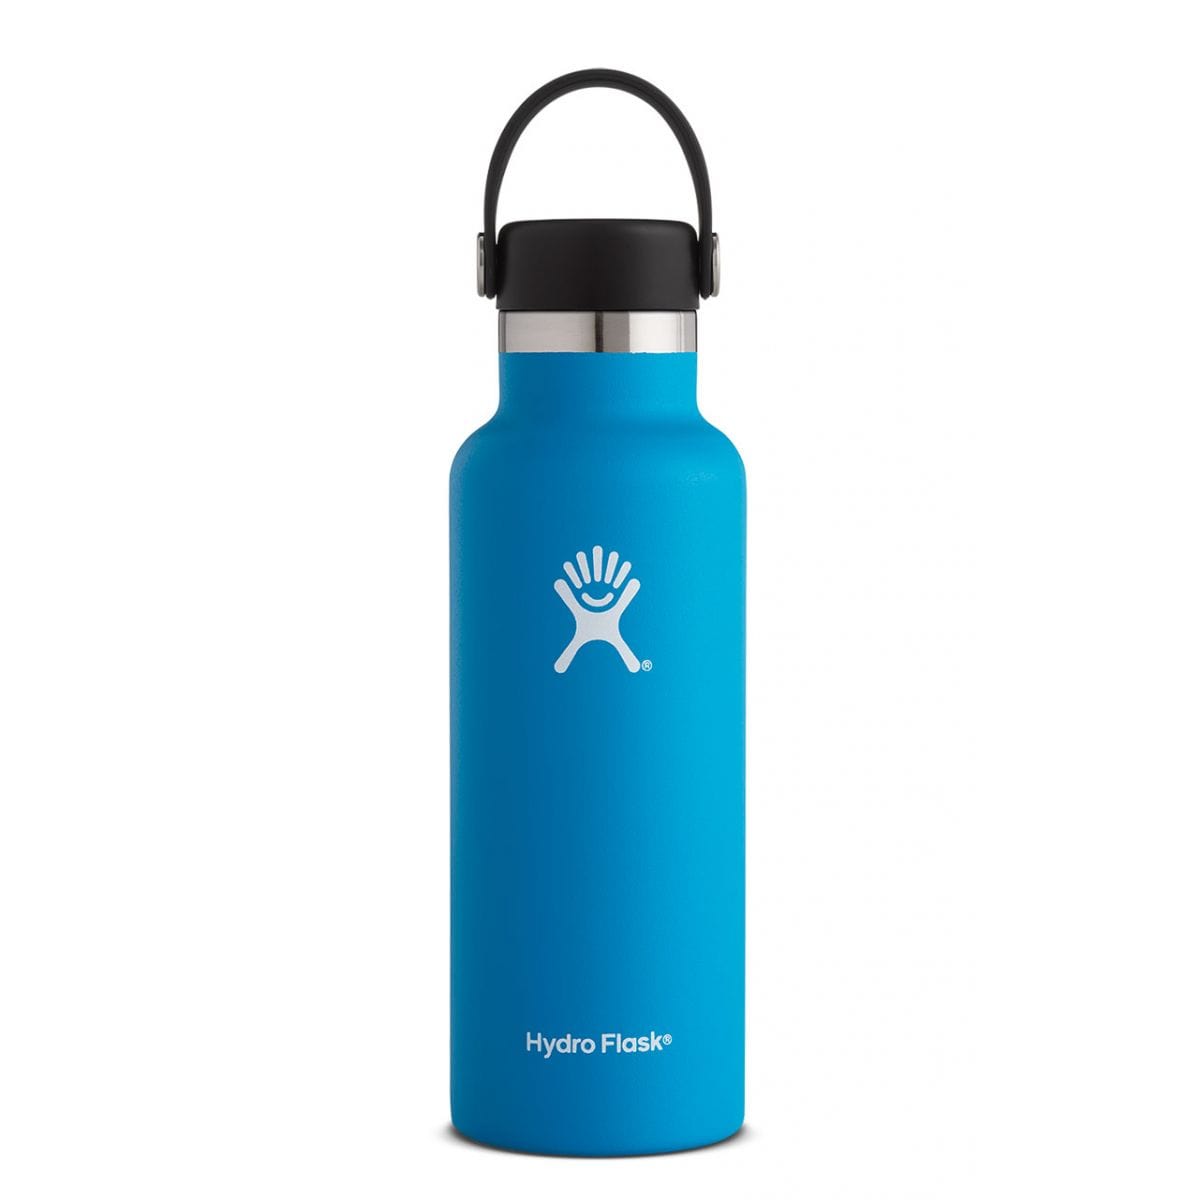 Hydro Flask 18 oz Standard Mouth Bottle Pacific